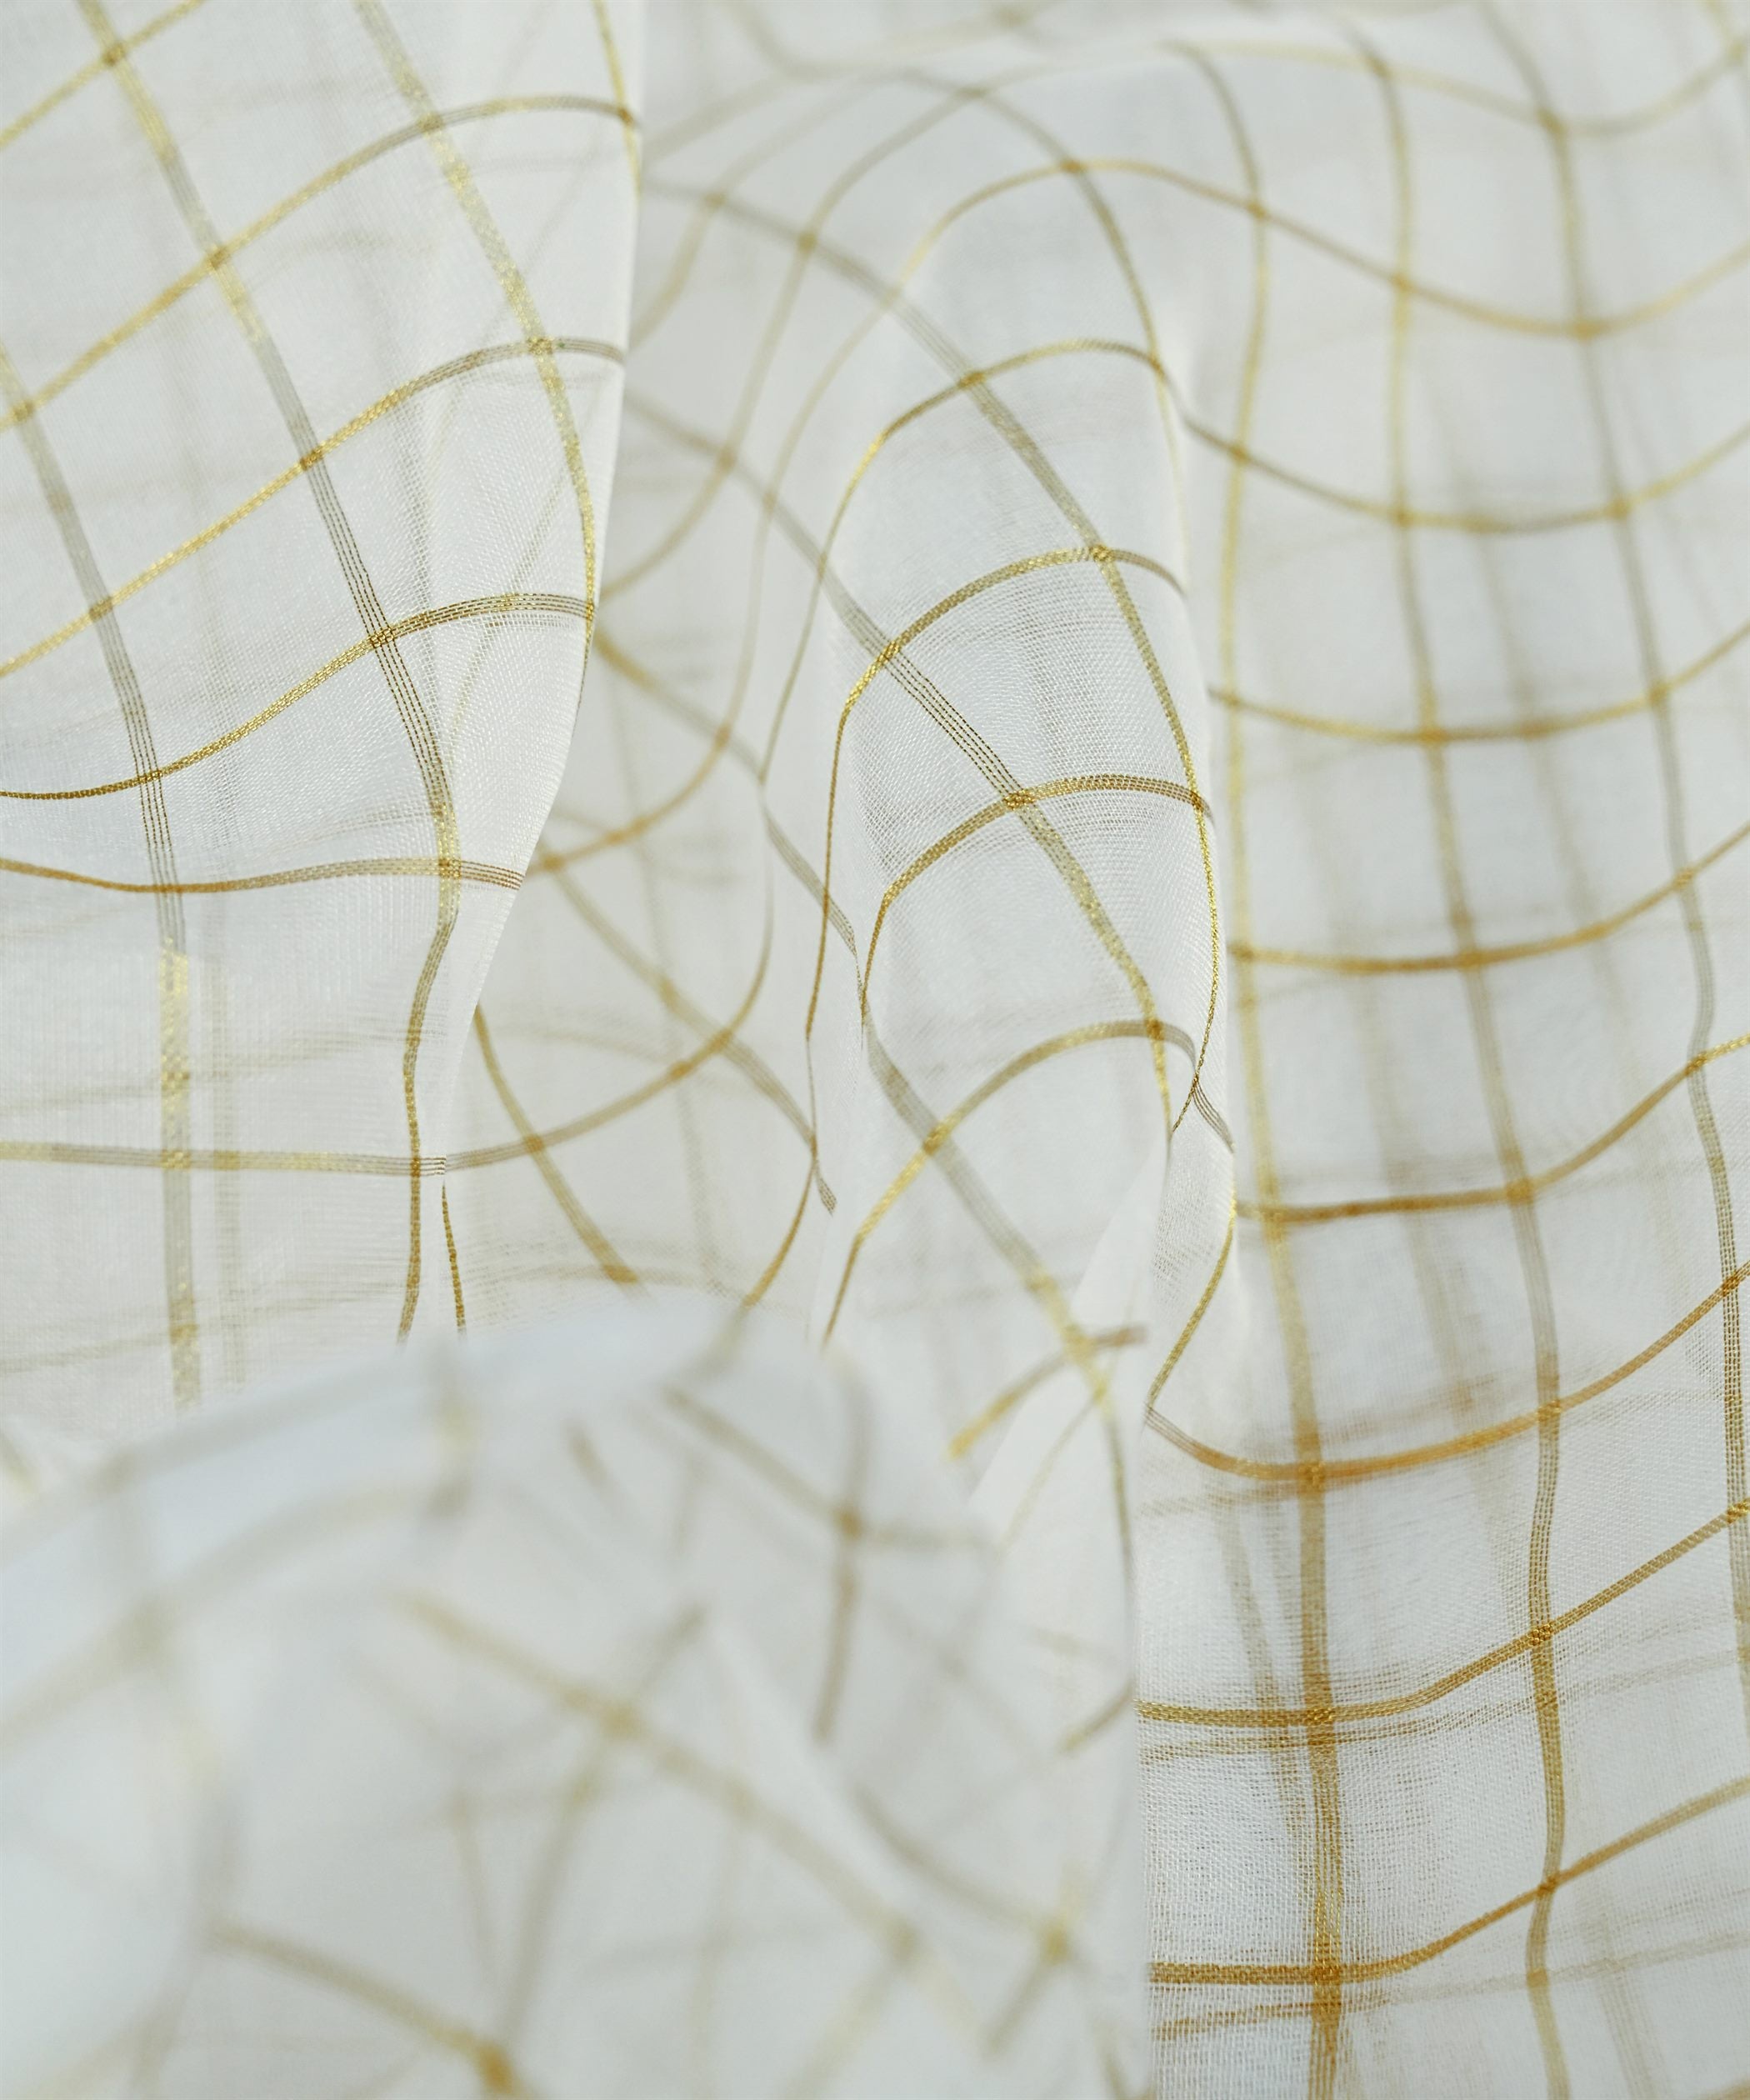 Organza Dyeable Fabric with golden checks